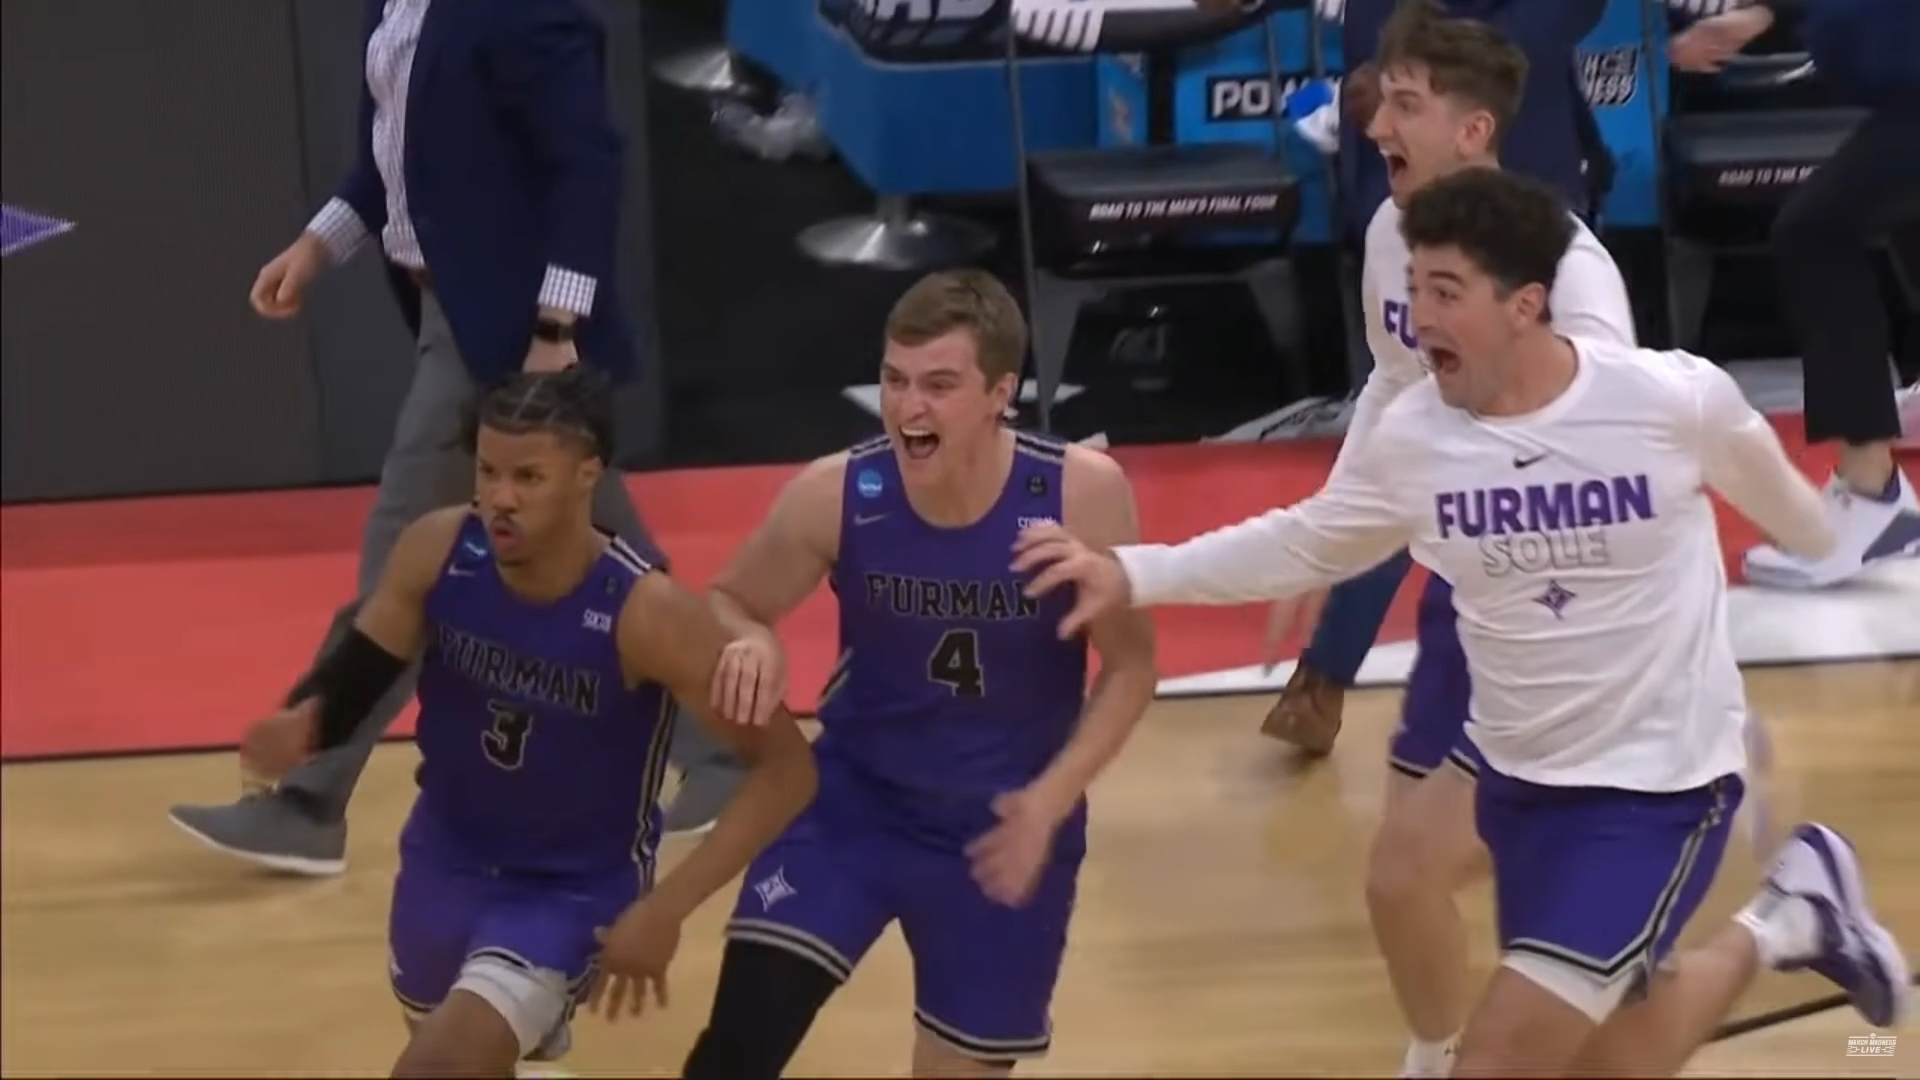 Furman Gets First Round March Madness Upset